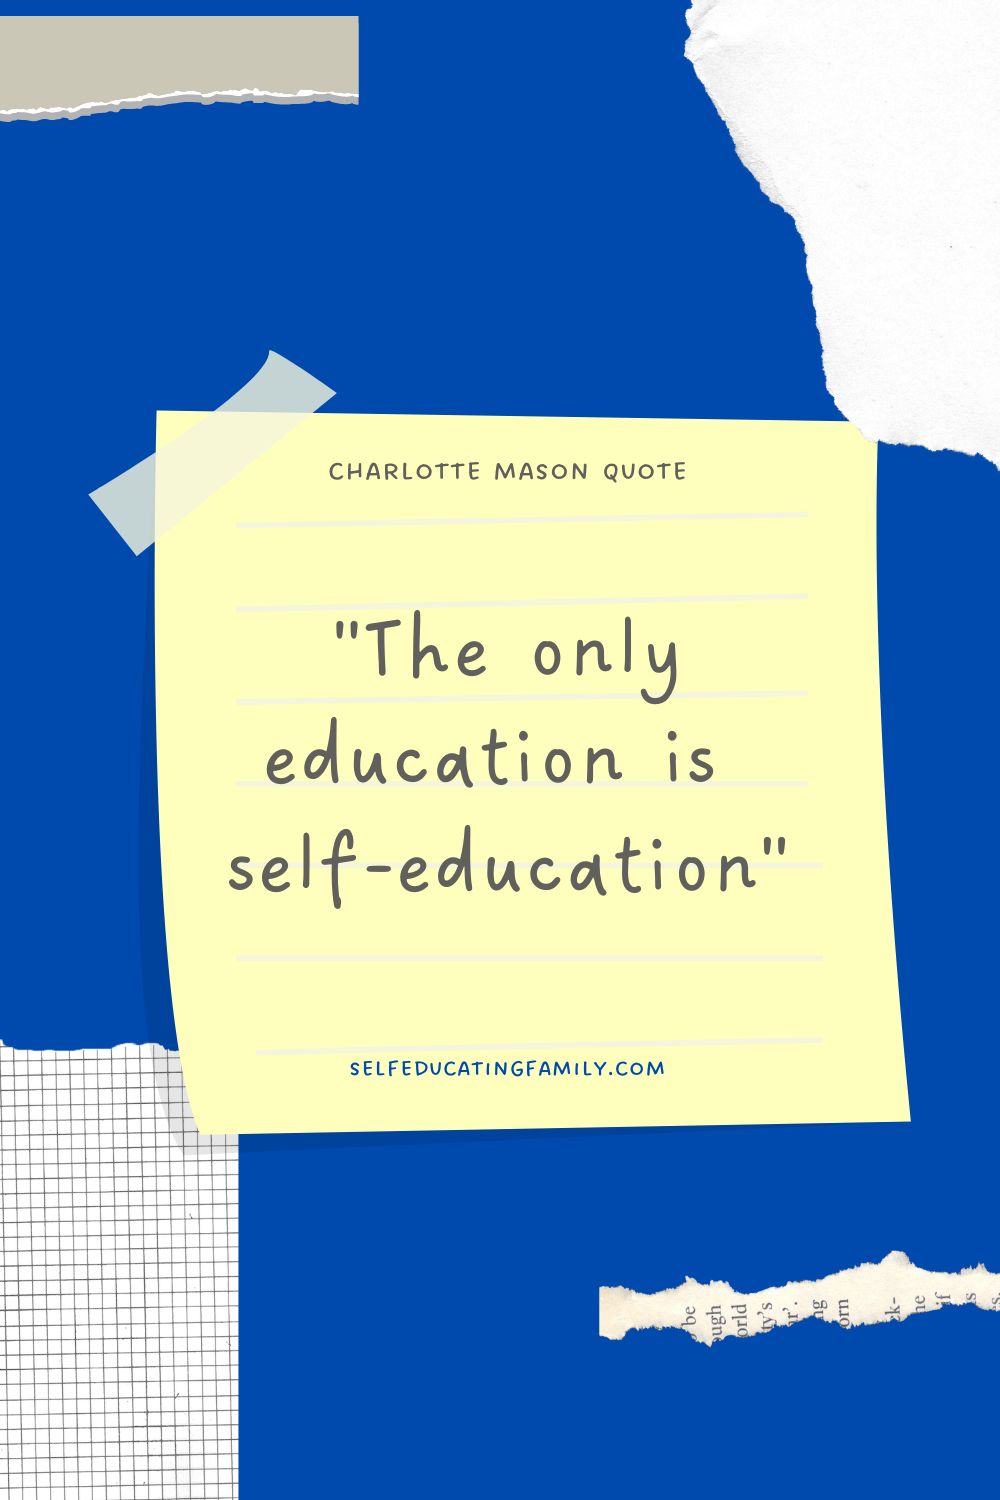 Charlotte Mason quotes: The only education is self-education